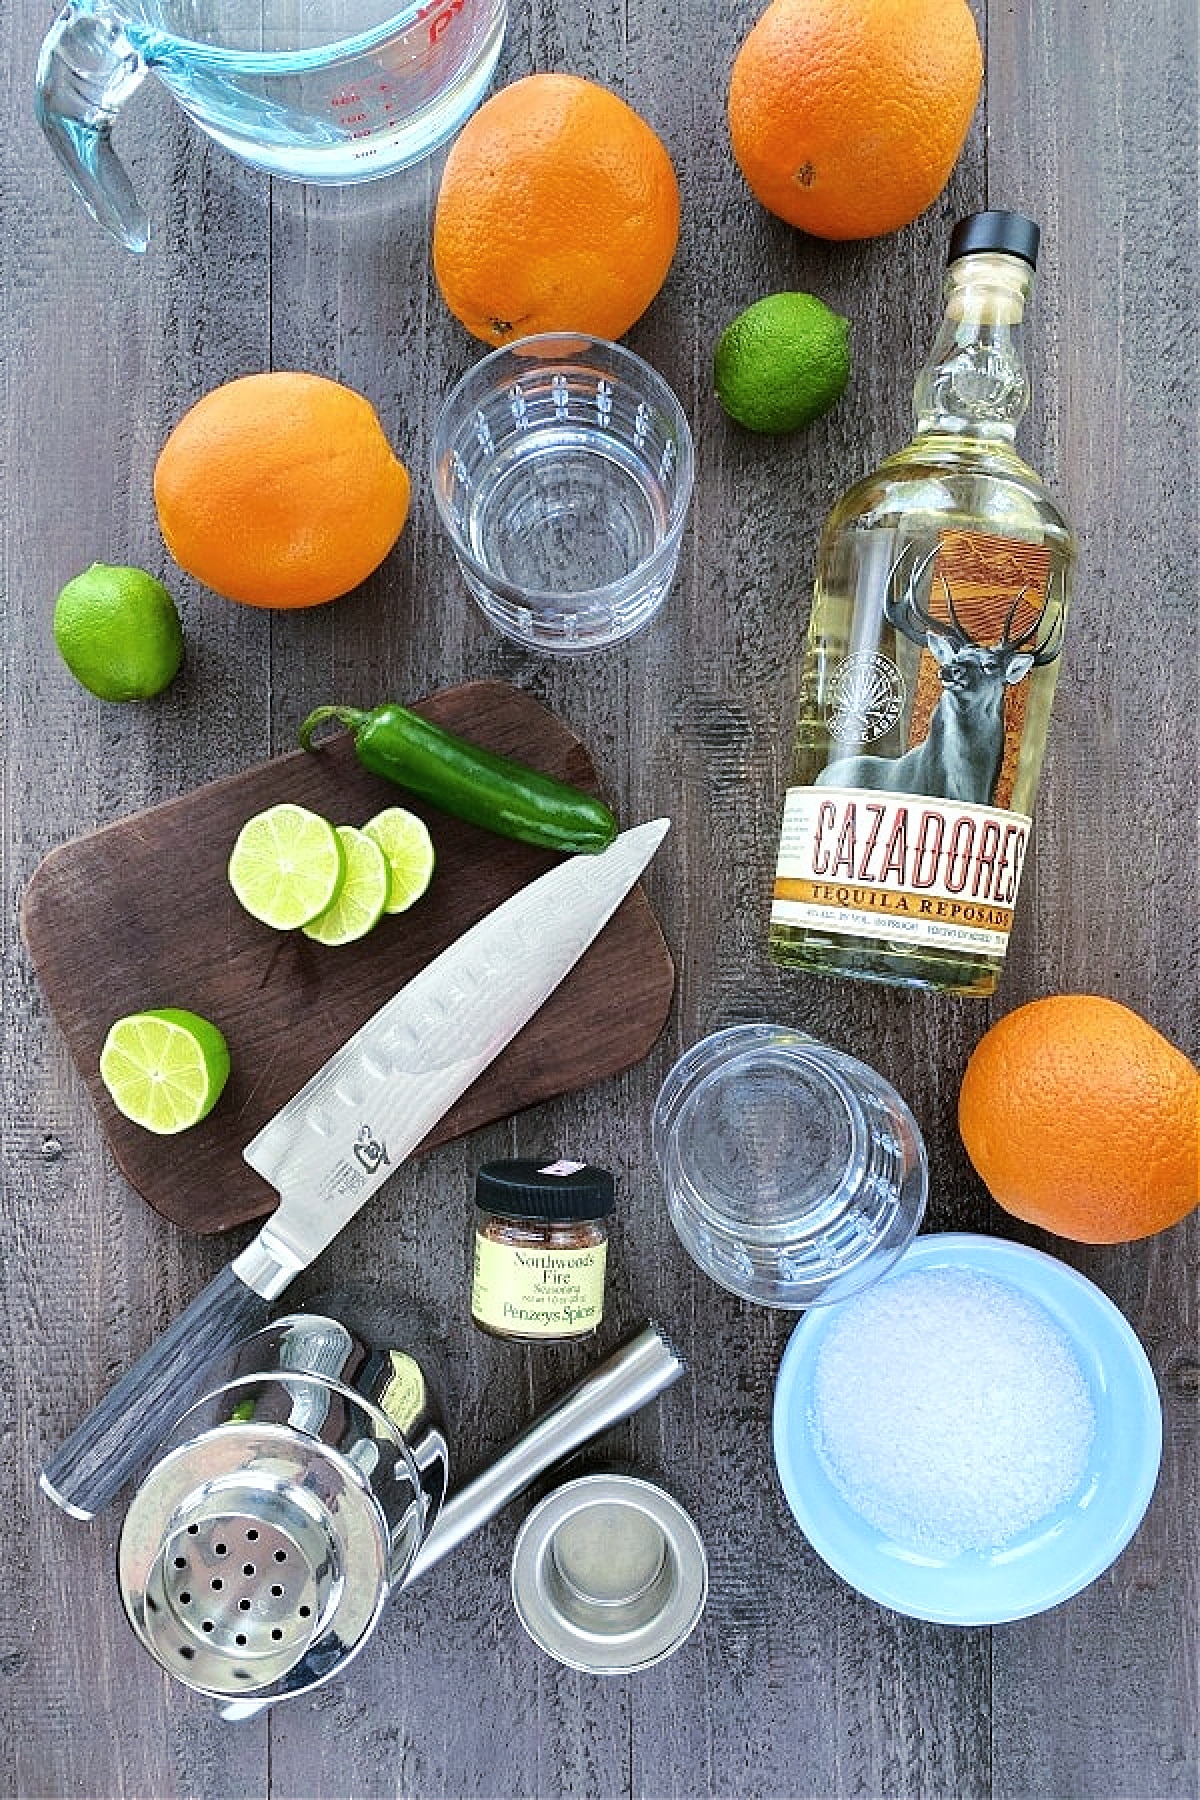 ingredients for making a margarita: fresh oranges, limes, and jalapeno, tequila, salt, soda